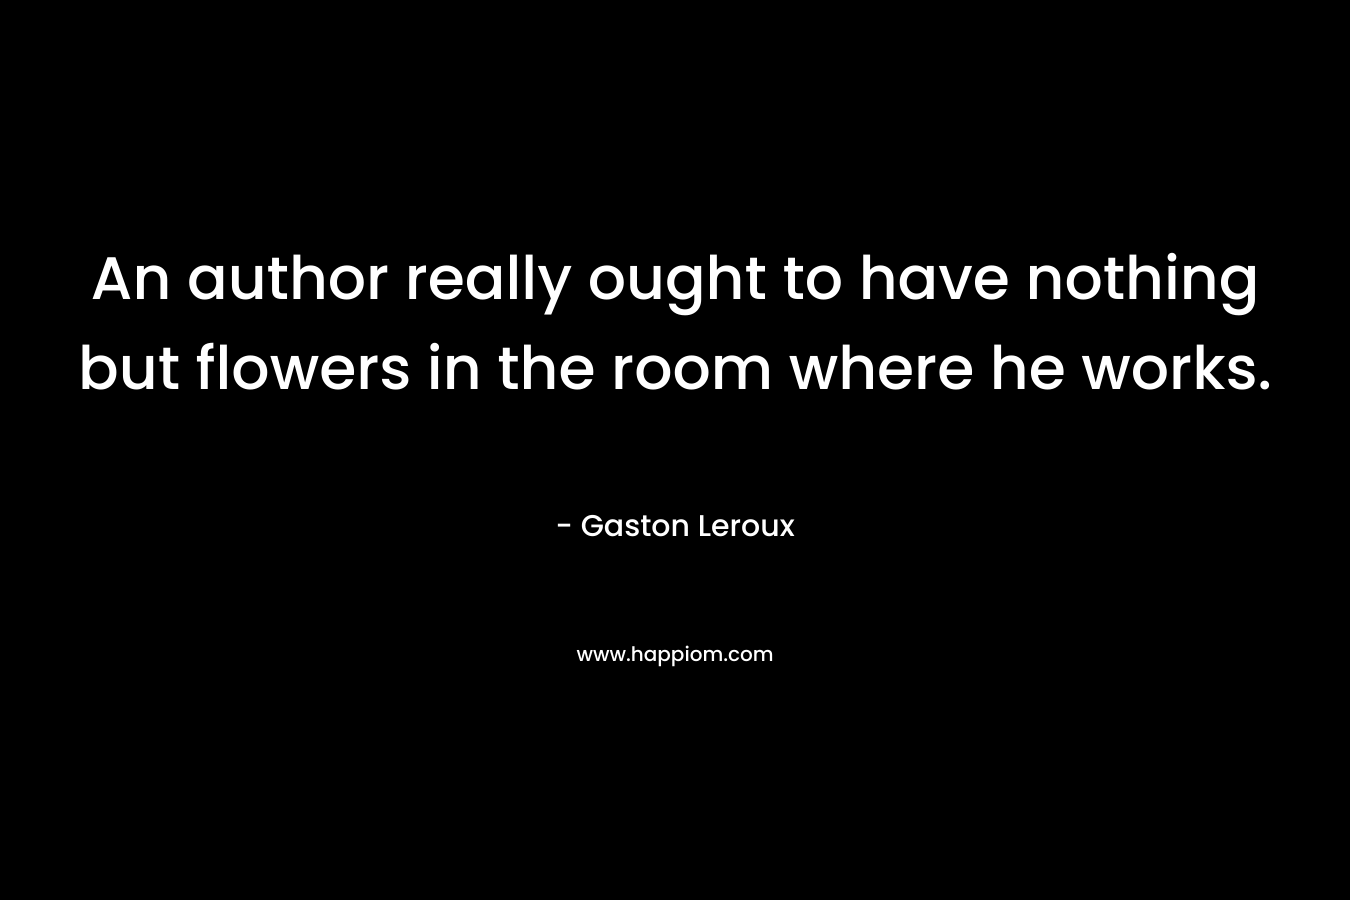 An author really ought to have nothing but flowers in the room where he works. – Gaston Leroux